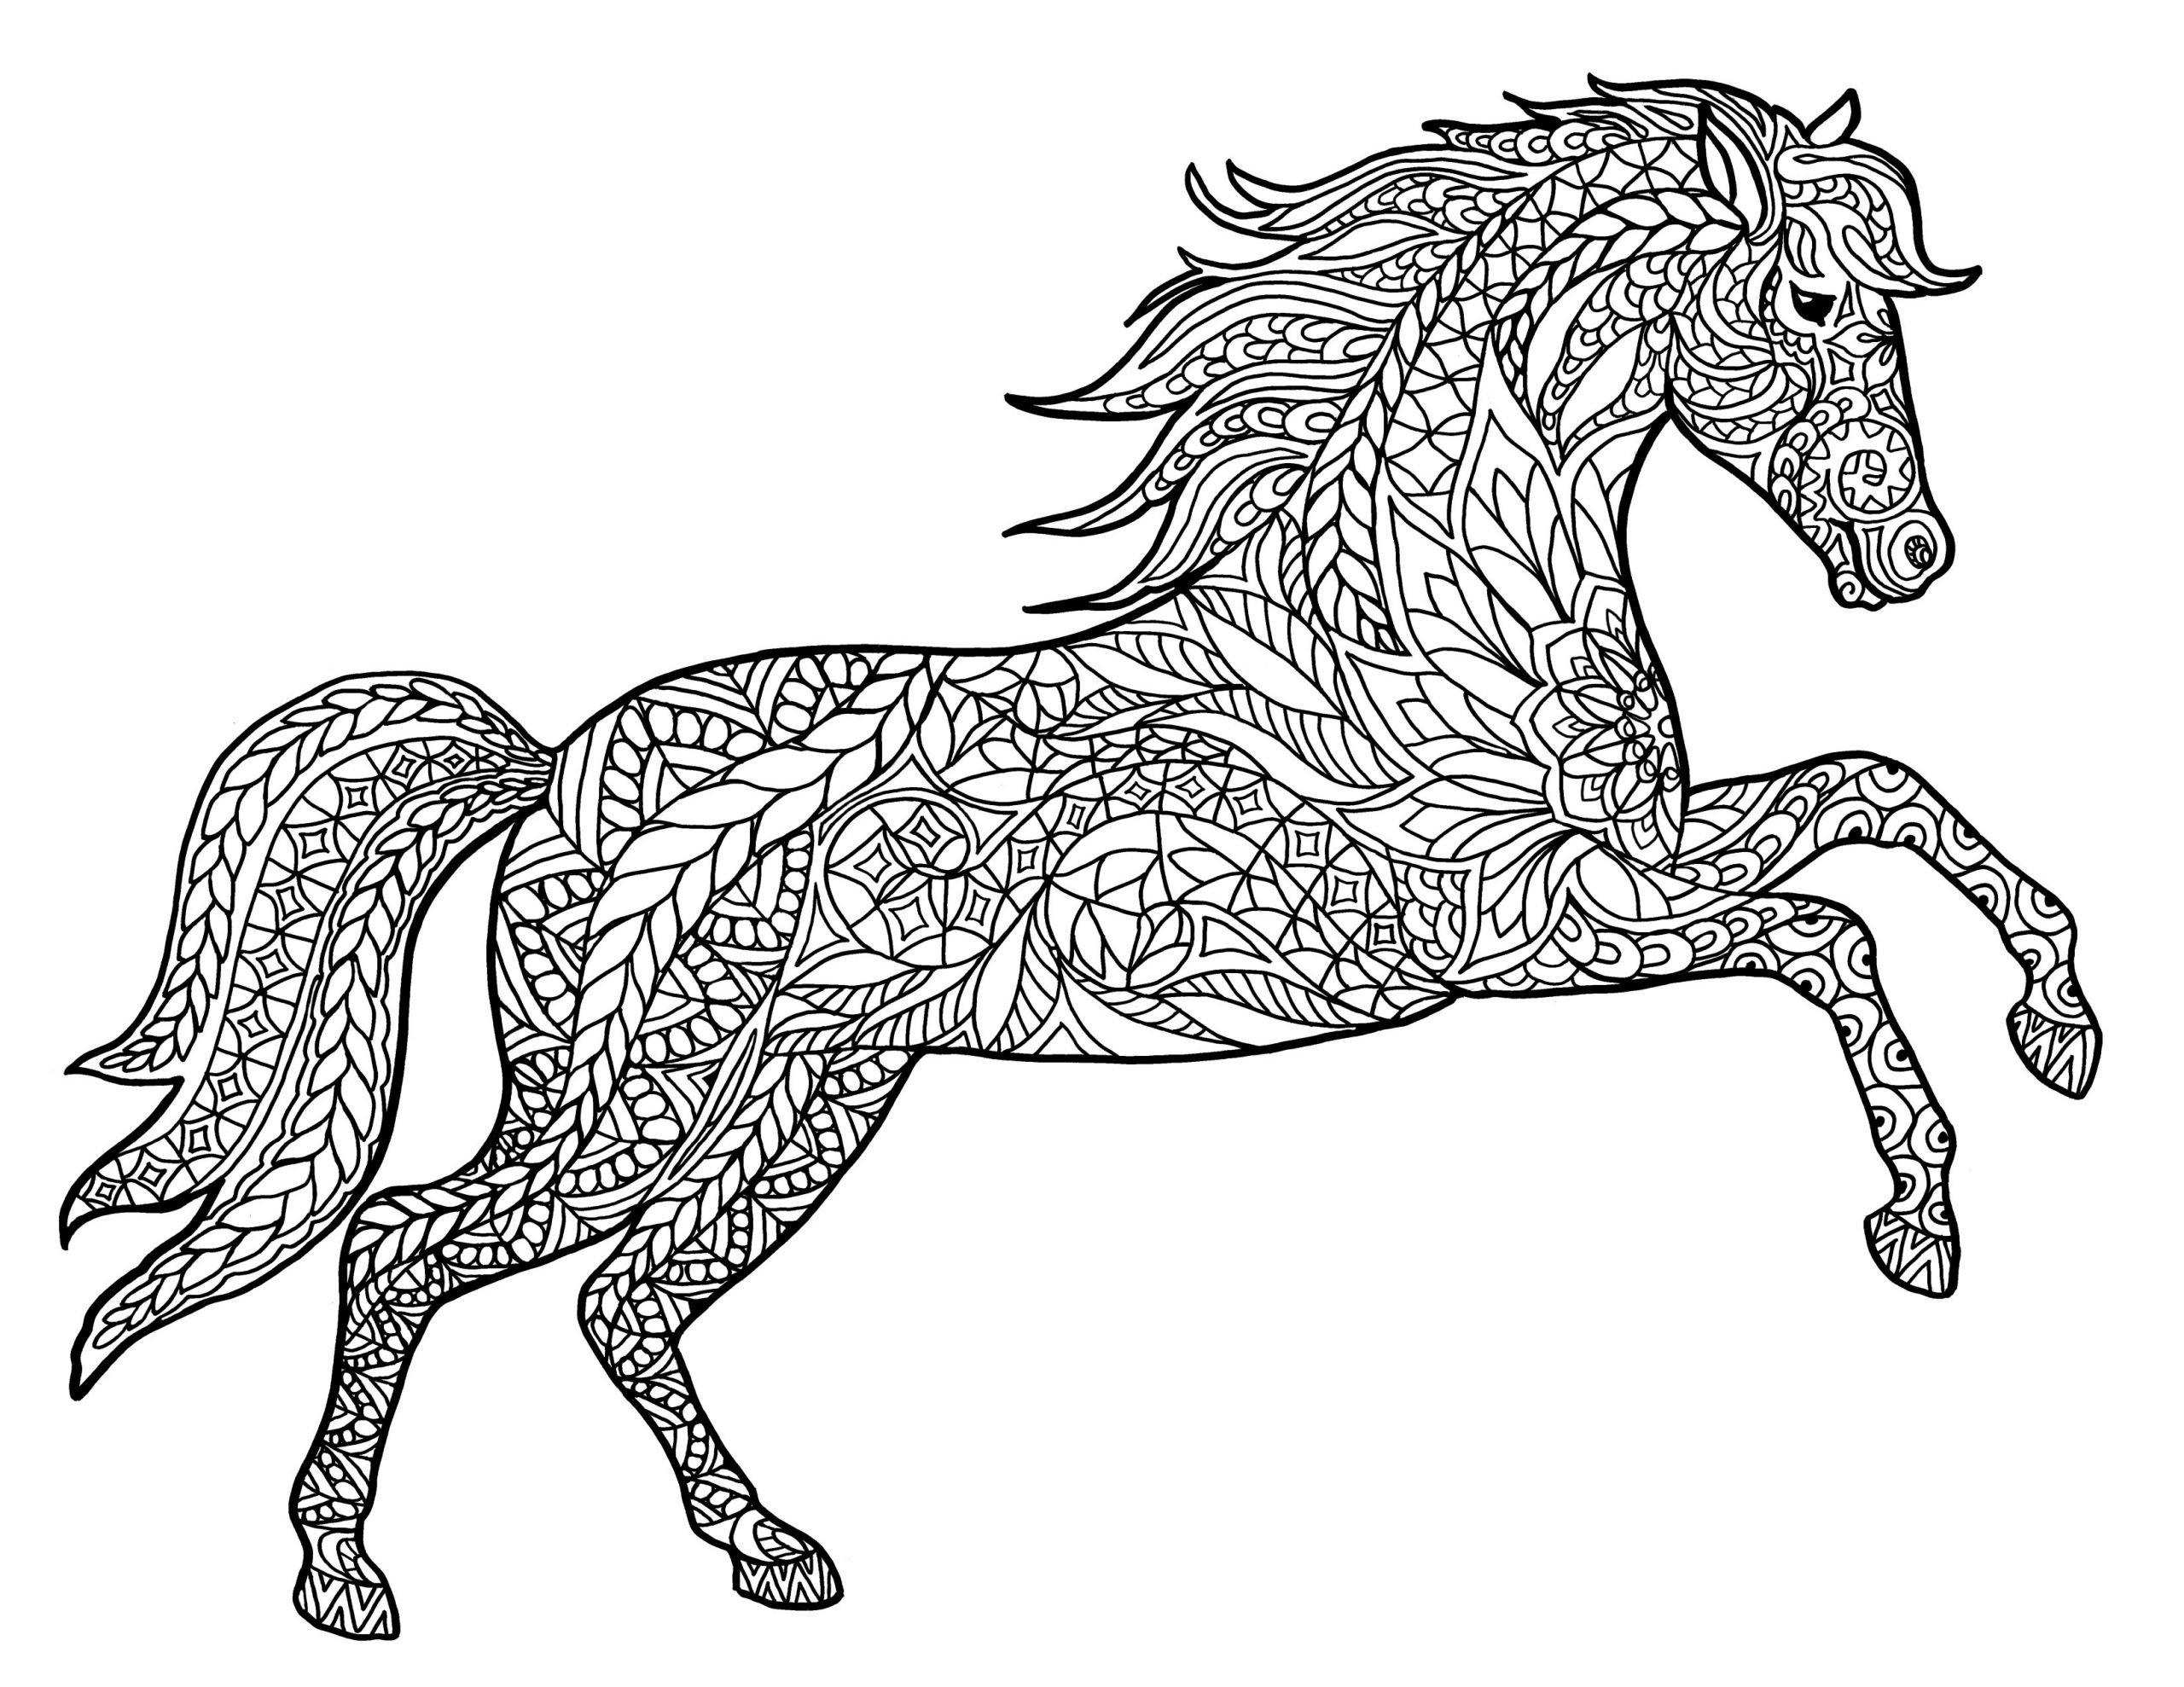 Adult Coloring Book Horse
 Animal Coloring Pages for Adults Best Coloring Pages For